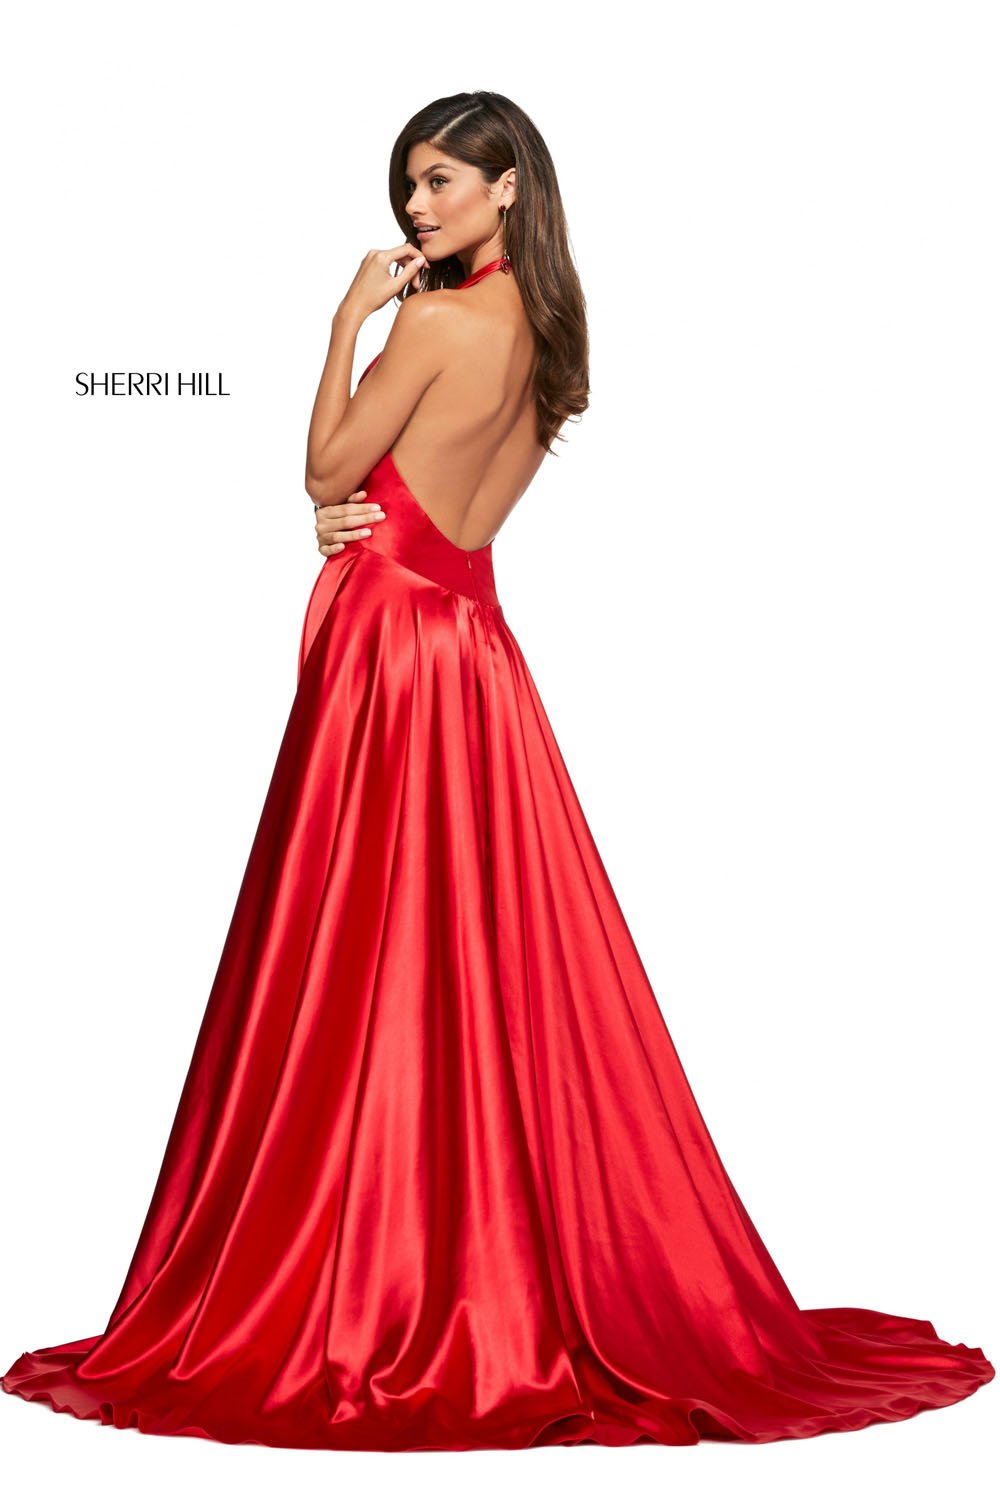 Sherri Hill 53624 dress images in these colors: Ivory, Black, Rose, Emerald, Mocha, Red, Light Blue, Navy, Royal, Blush, Yellow, Light Green, Aqua, Coral.